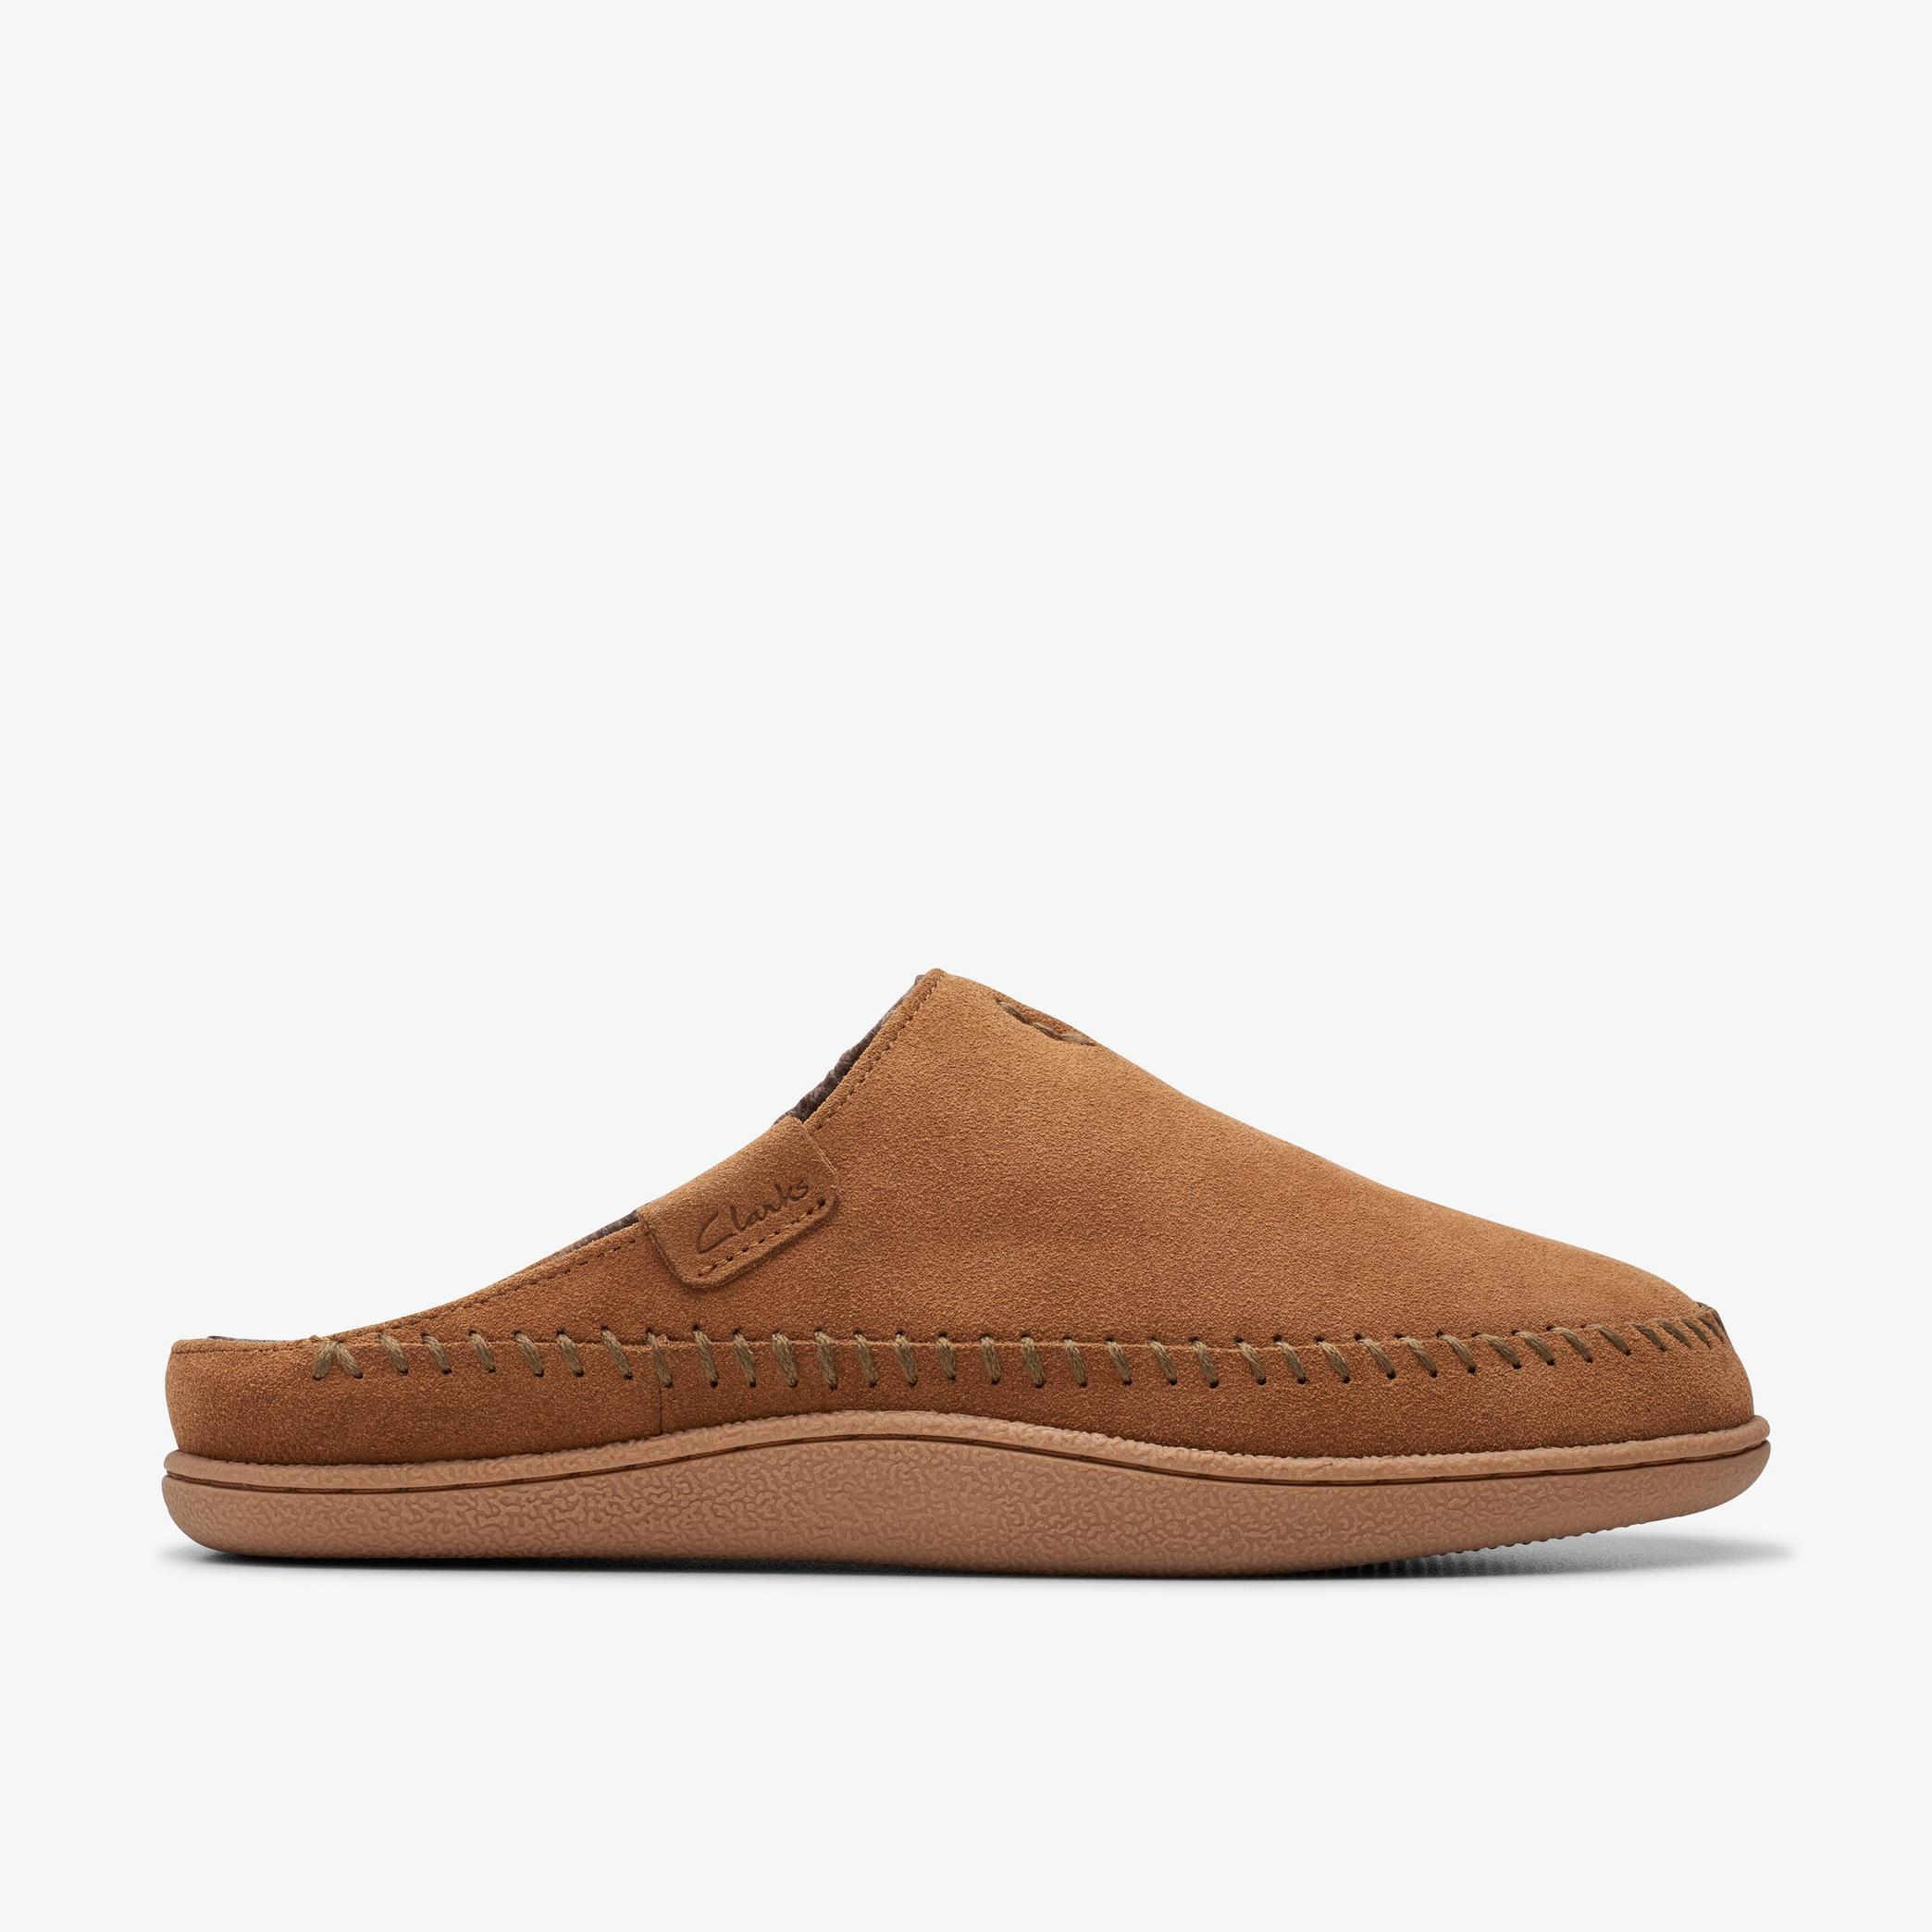 Clarks: Extra Savings on Men's, Women's, & Kids' Shoes & Acessories